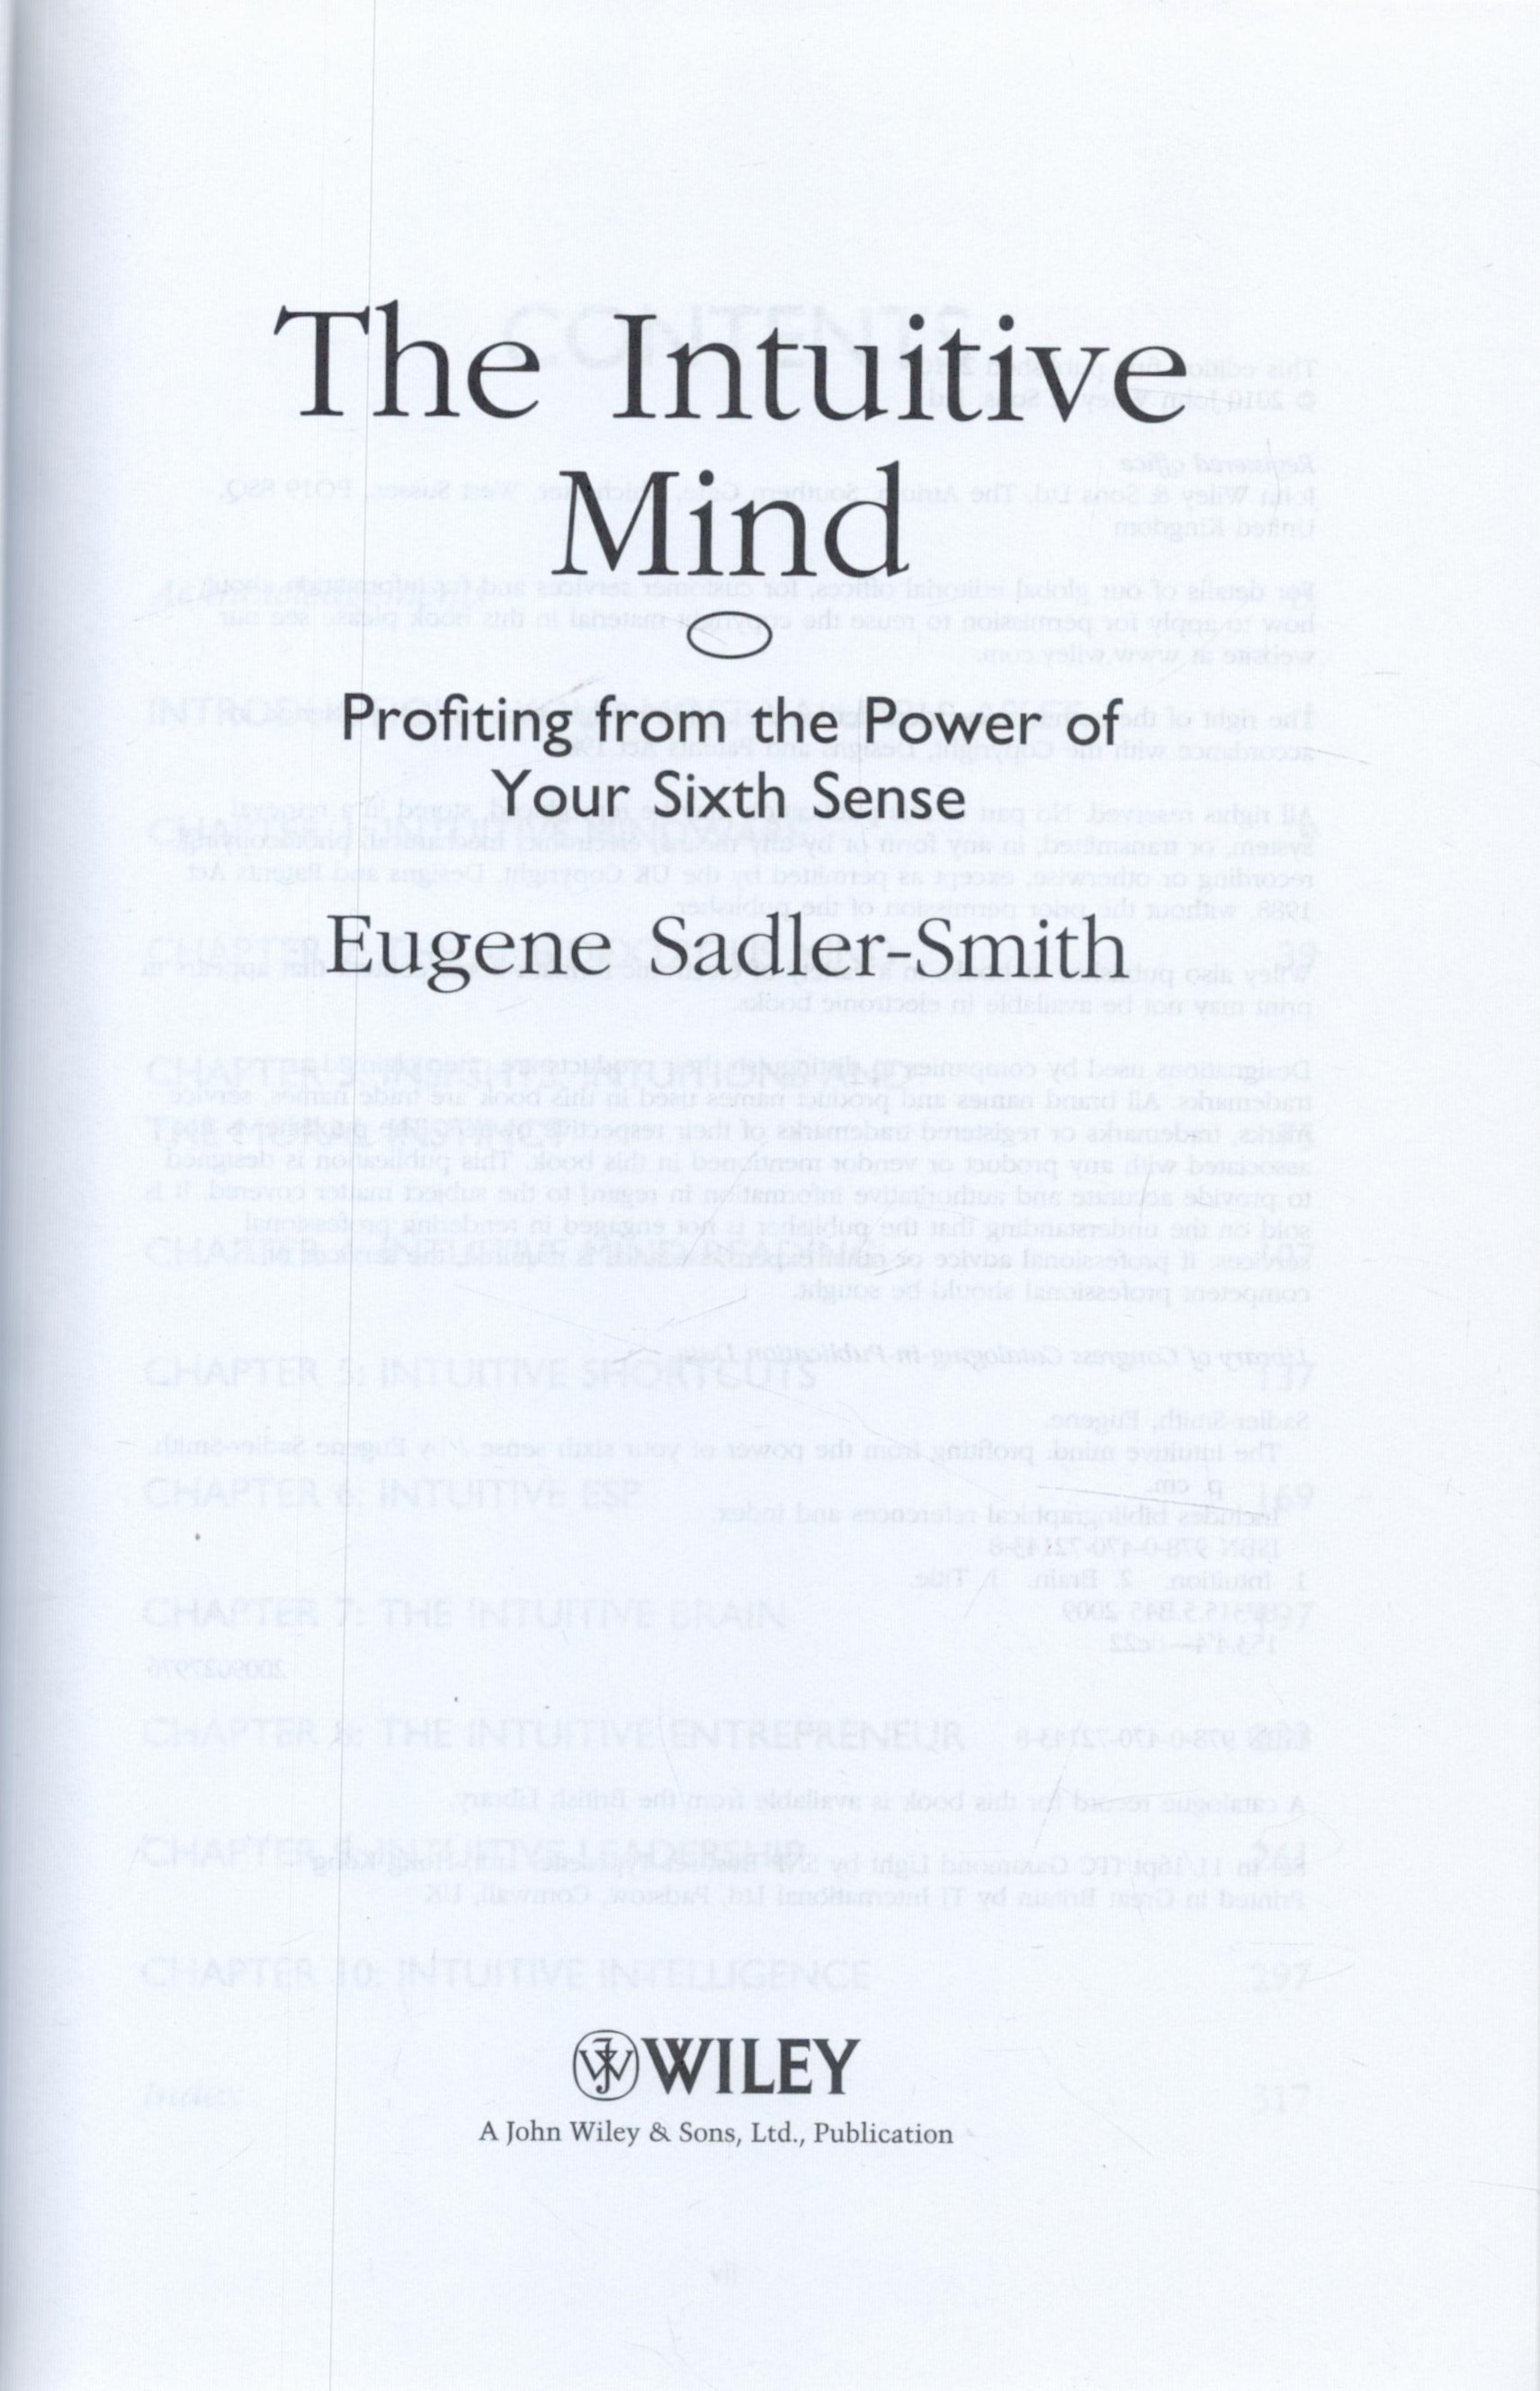 The Intuitive Mind - Profiting from the power of your sixth sense by Eugene Sadler-Smith 2010 - Image 2 of 3